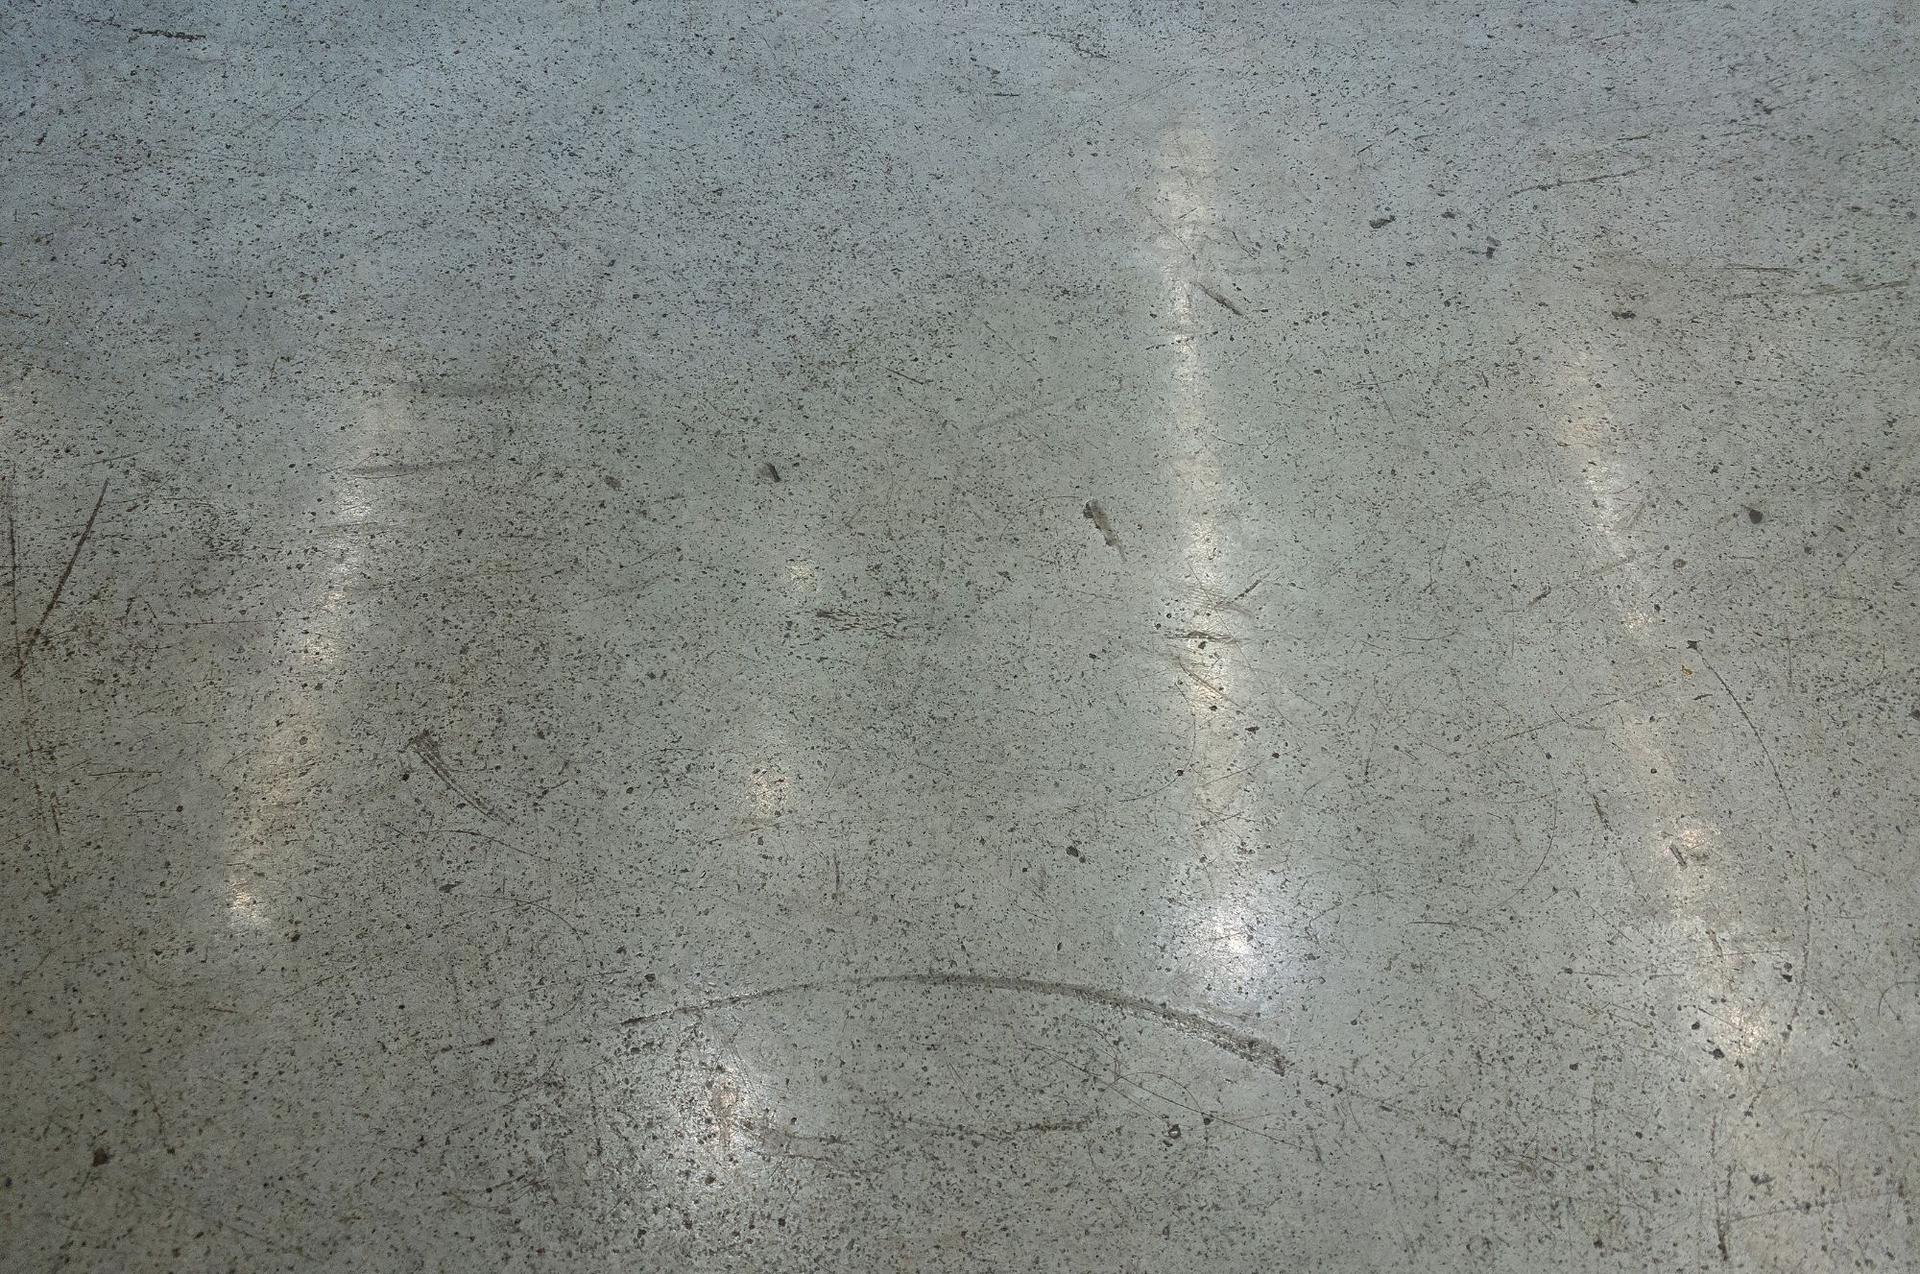 How to clean concrete floors